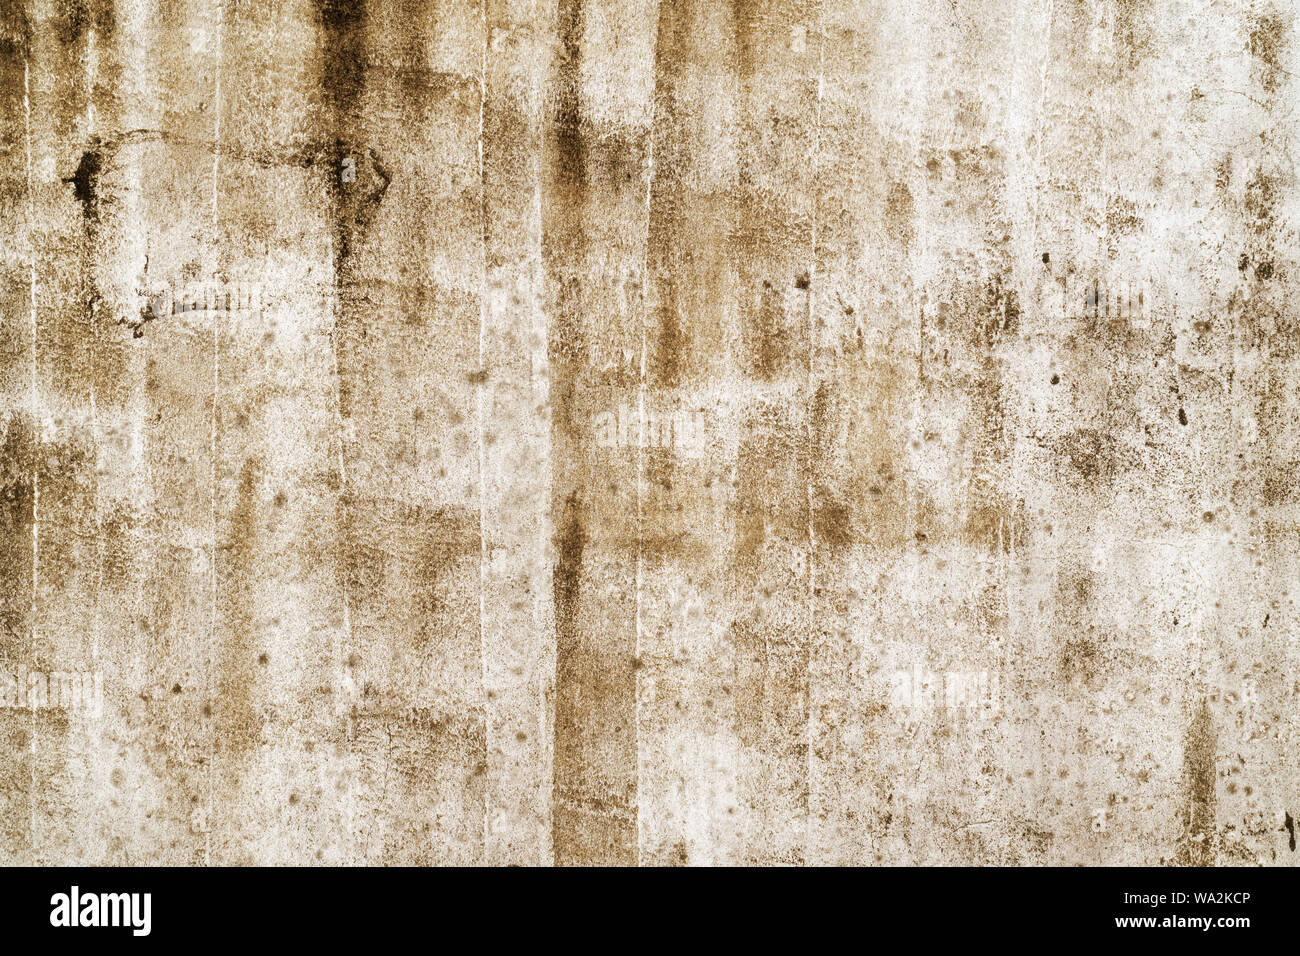 Old  gray cement or concrete wall. Grunge plastered stucco  textured background. Stock Photo